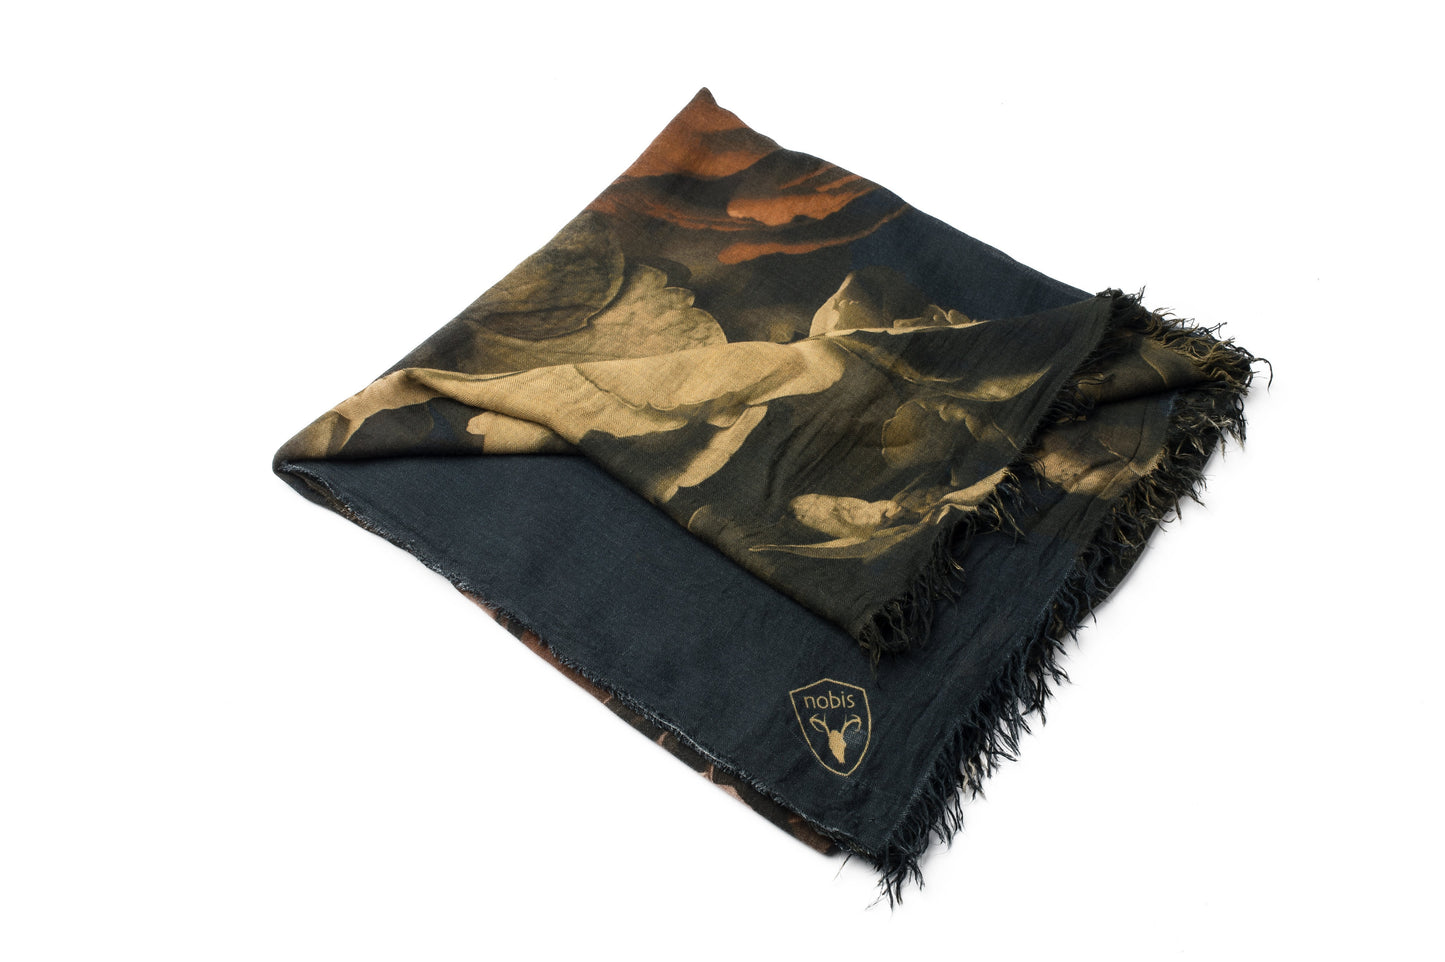 Square modal cashmere blend scarf with fringe edges in a Floral Print